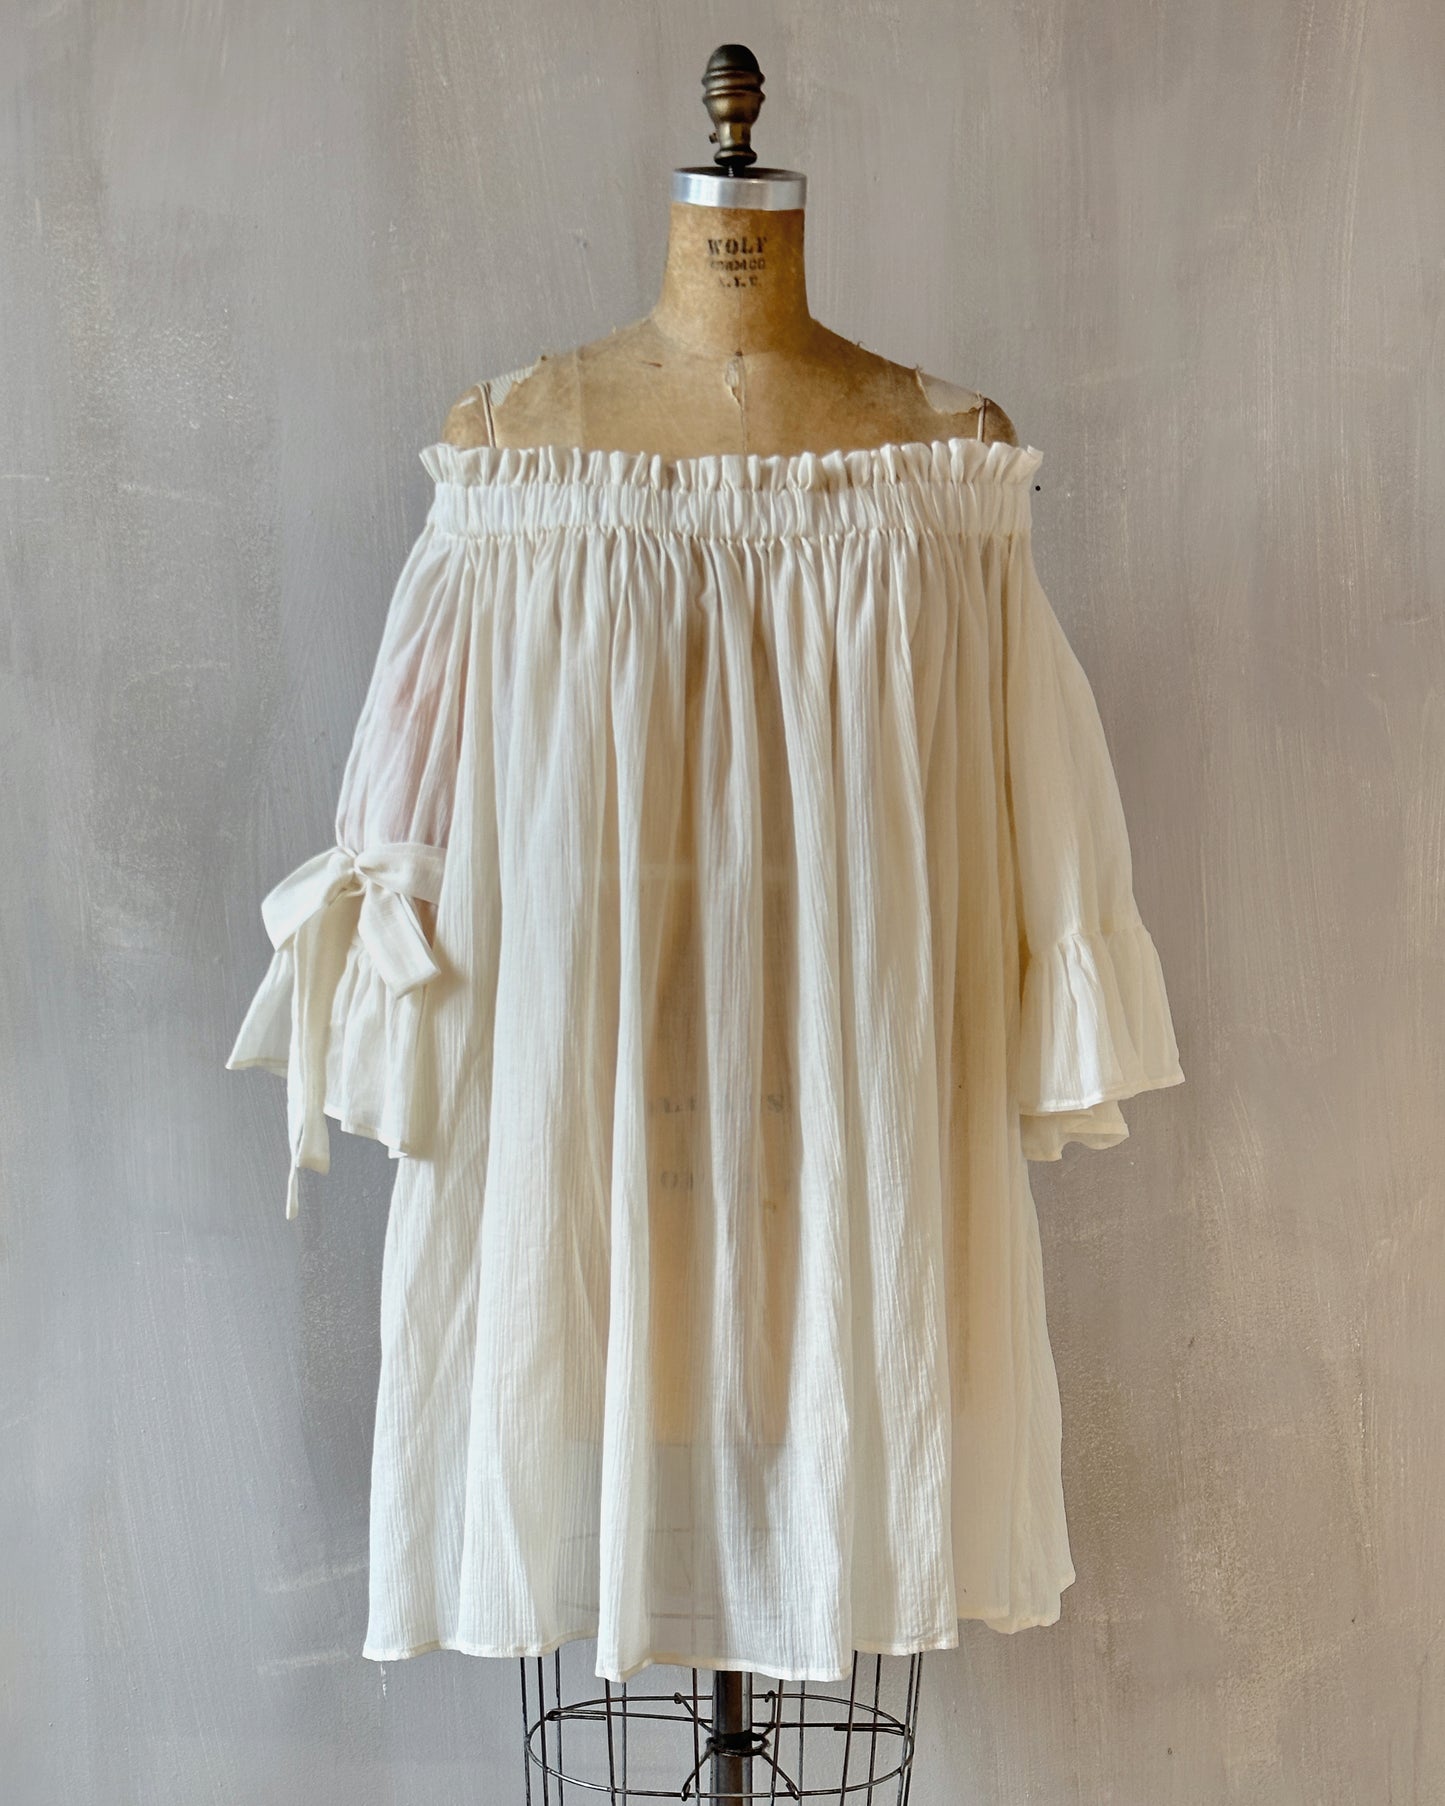 Paperbag Tunic in Cotton Voile (Parchment)